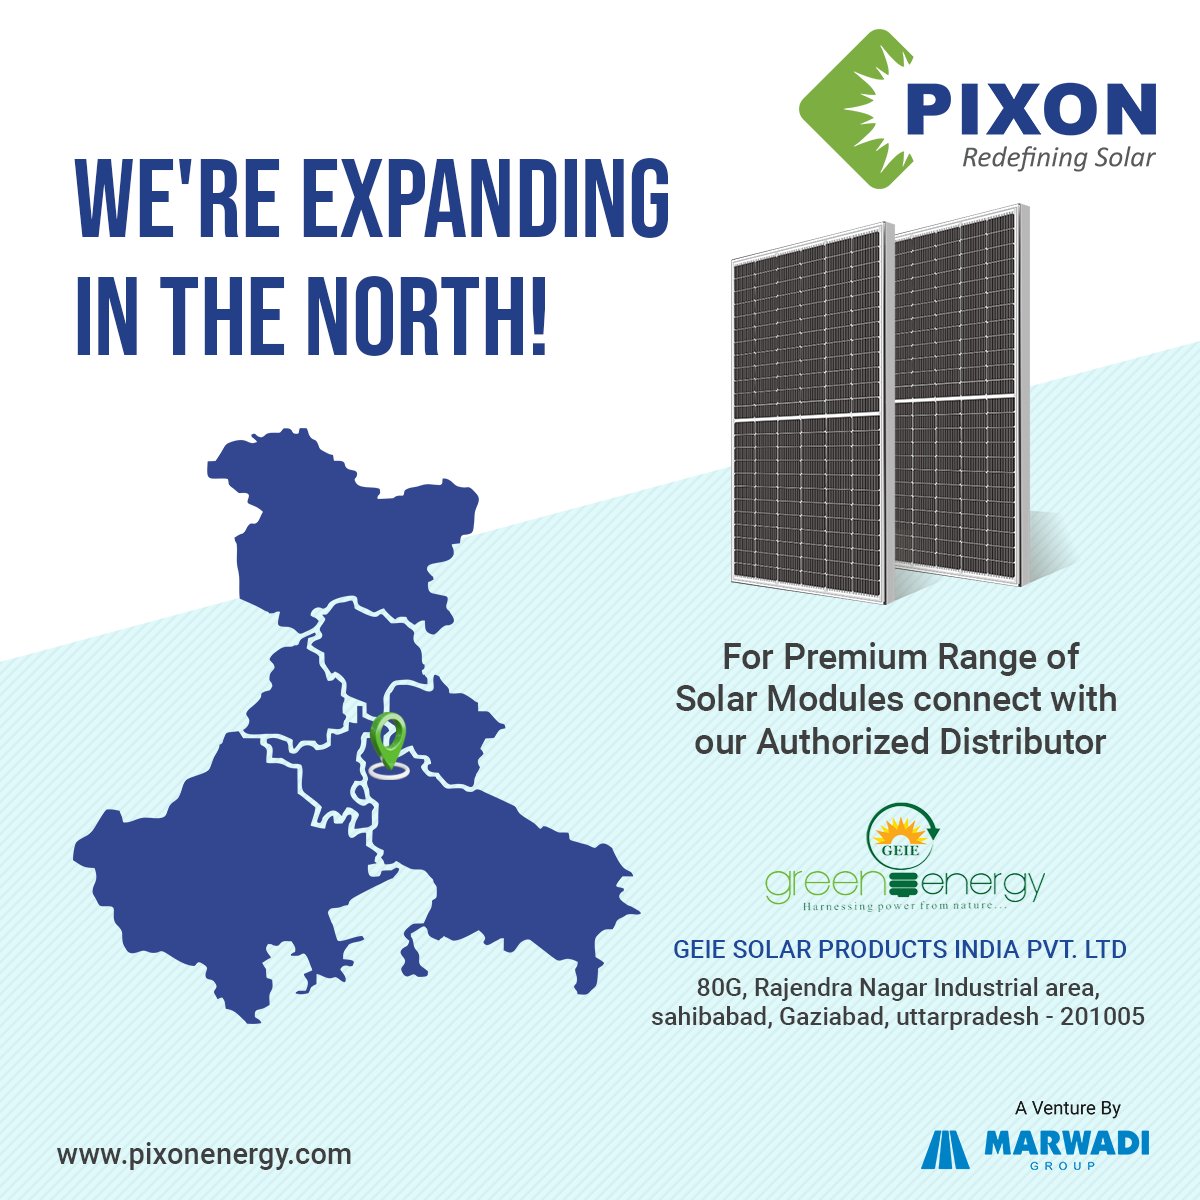 GEIE Solar Products India Pvt Ltd are joining forces with PIXON to illuminate the Northern Region. 

Get ready for a brighter, greener future.

#pixonsolar #distributorship #modulemanufacturer #solarpanels #sustainablefuture #solarenergy #north #uttarpradesh #gaziabad